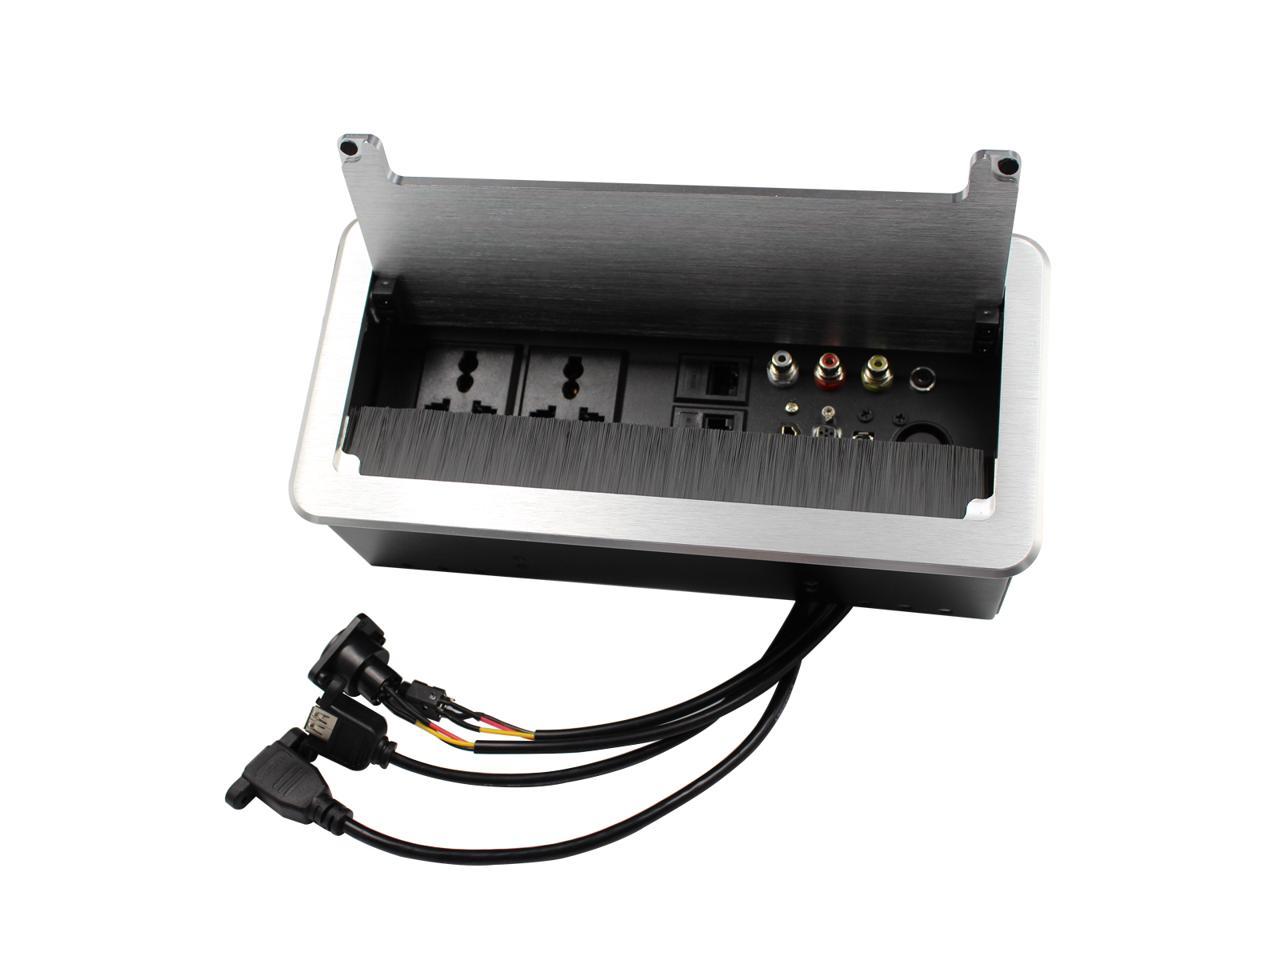 Table Pop up Power Date Center Connection Box with Outlet Network HDMI for Conference desk 